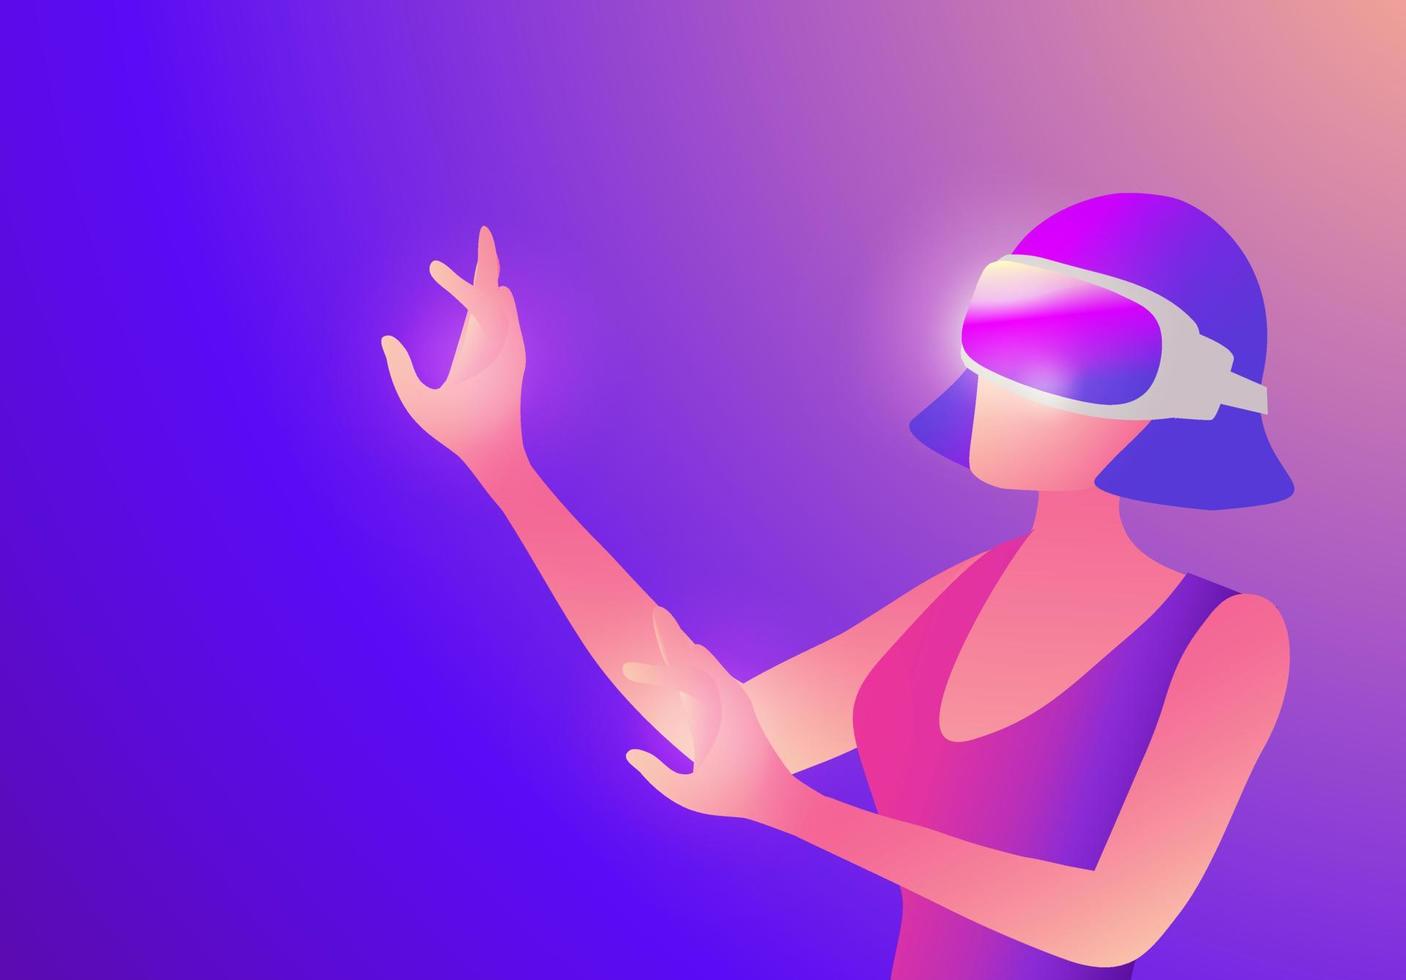 Woman wearing virtual reality goggle glass, having 3d experience in virtual reality  vector illustration. Metaverse and blockchain 3D experience technology concept